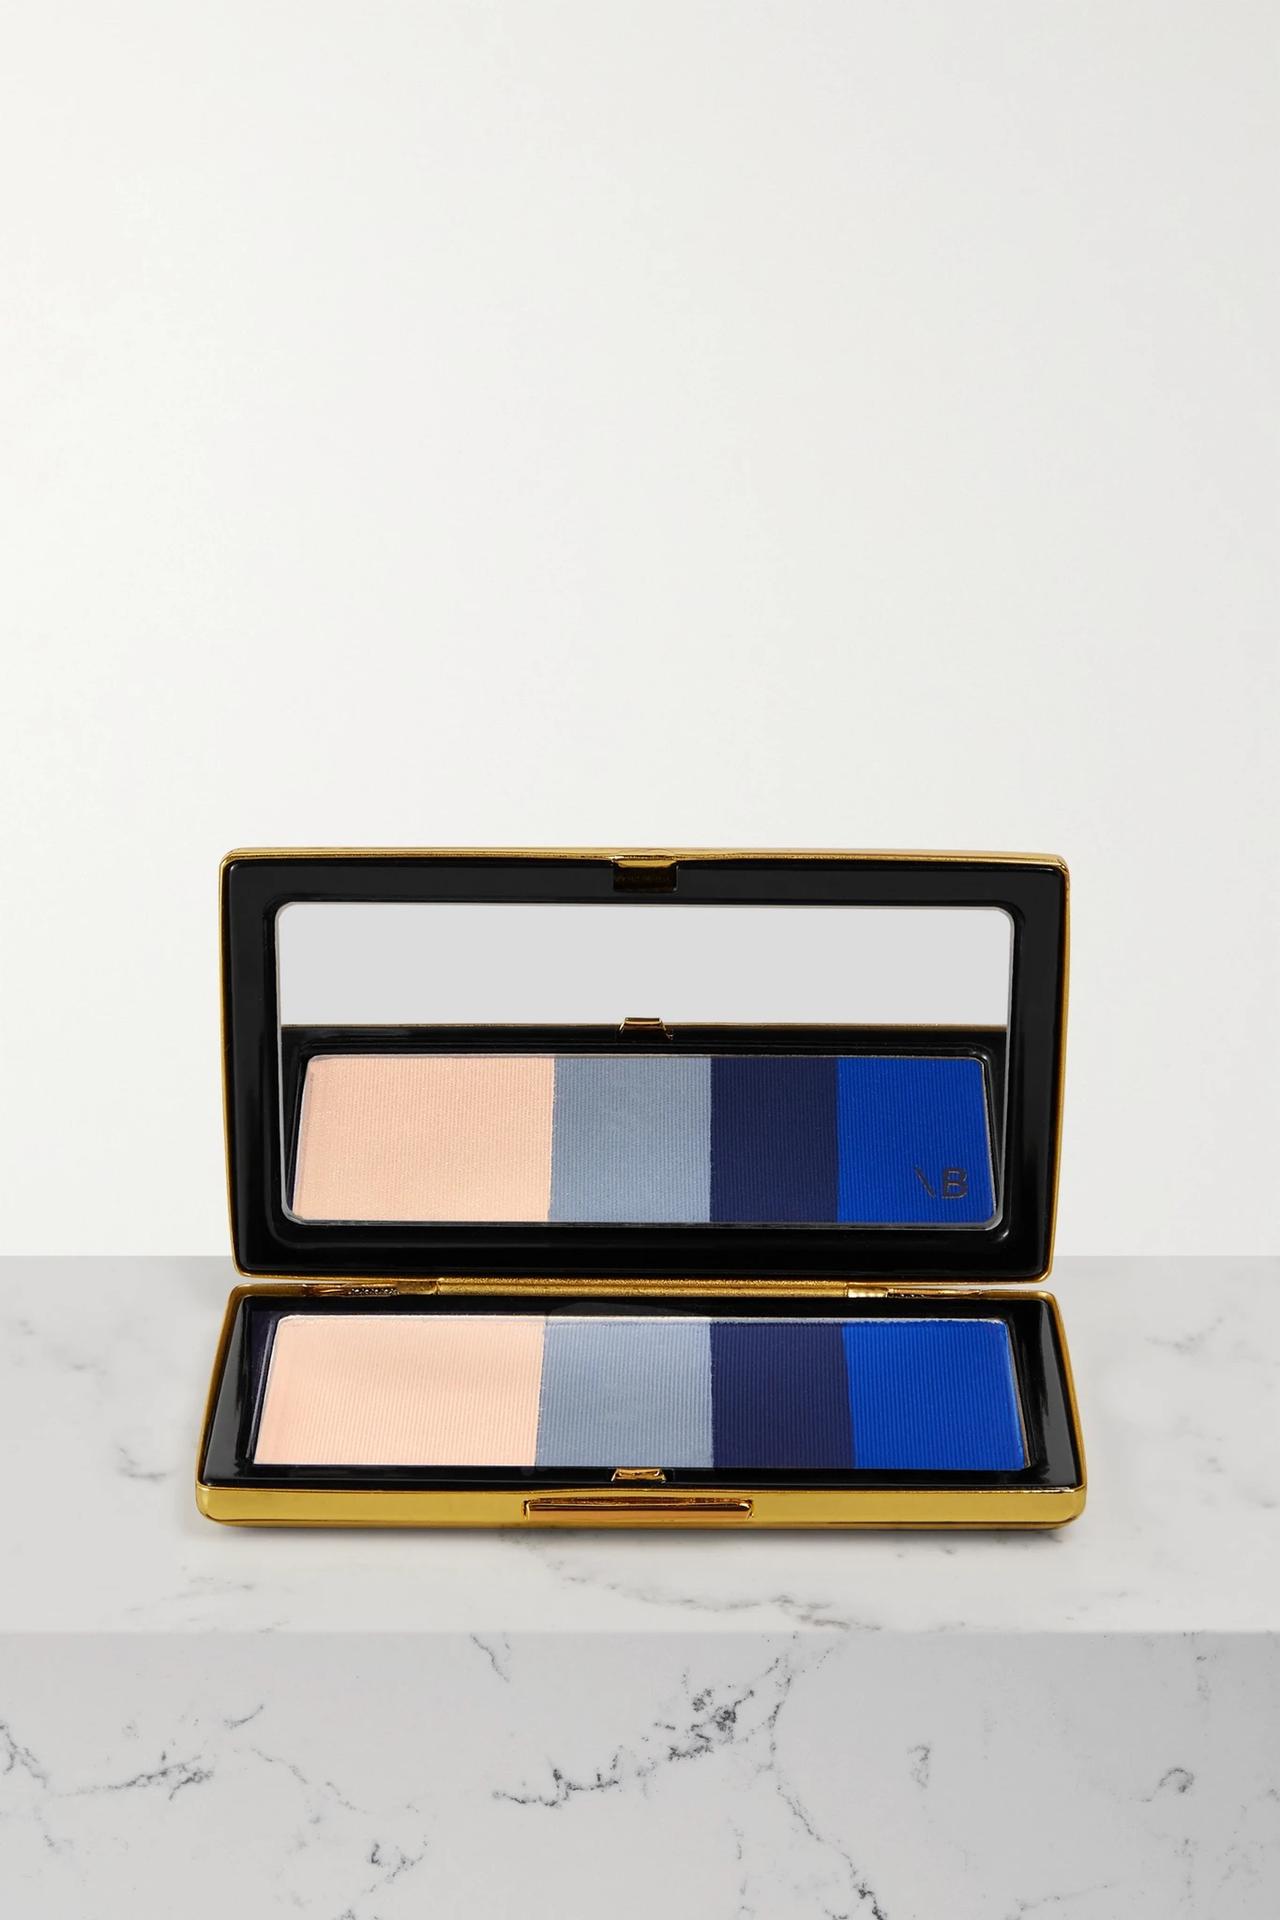 Long gold and mirrored eyeshadow palette with nude, light blue, navy blue and bold electric blue eyeshadows on a marble table